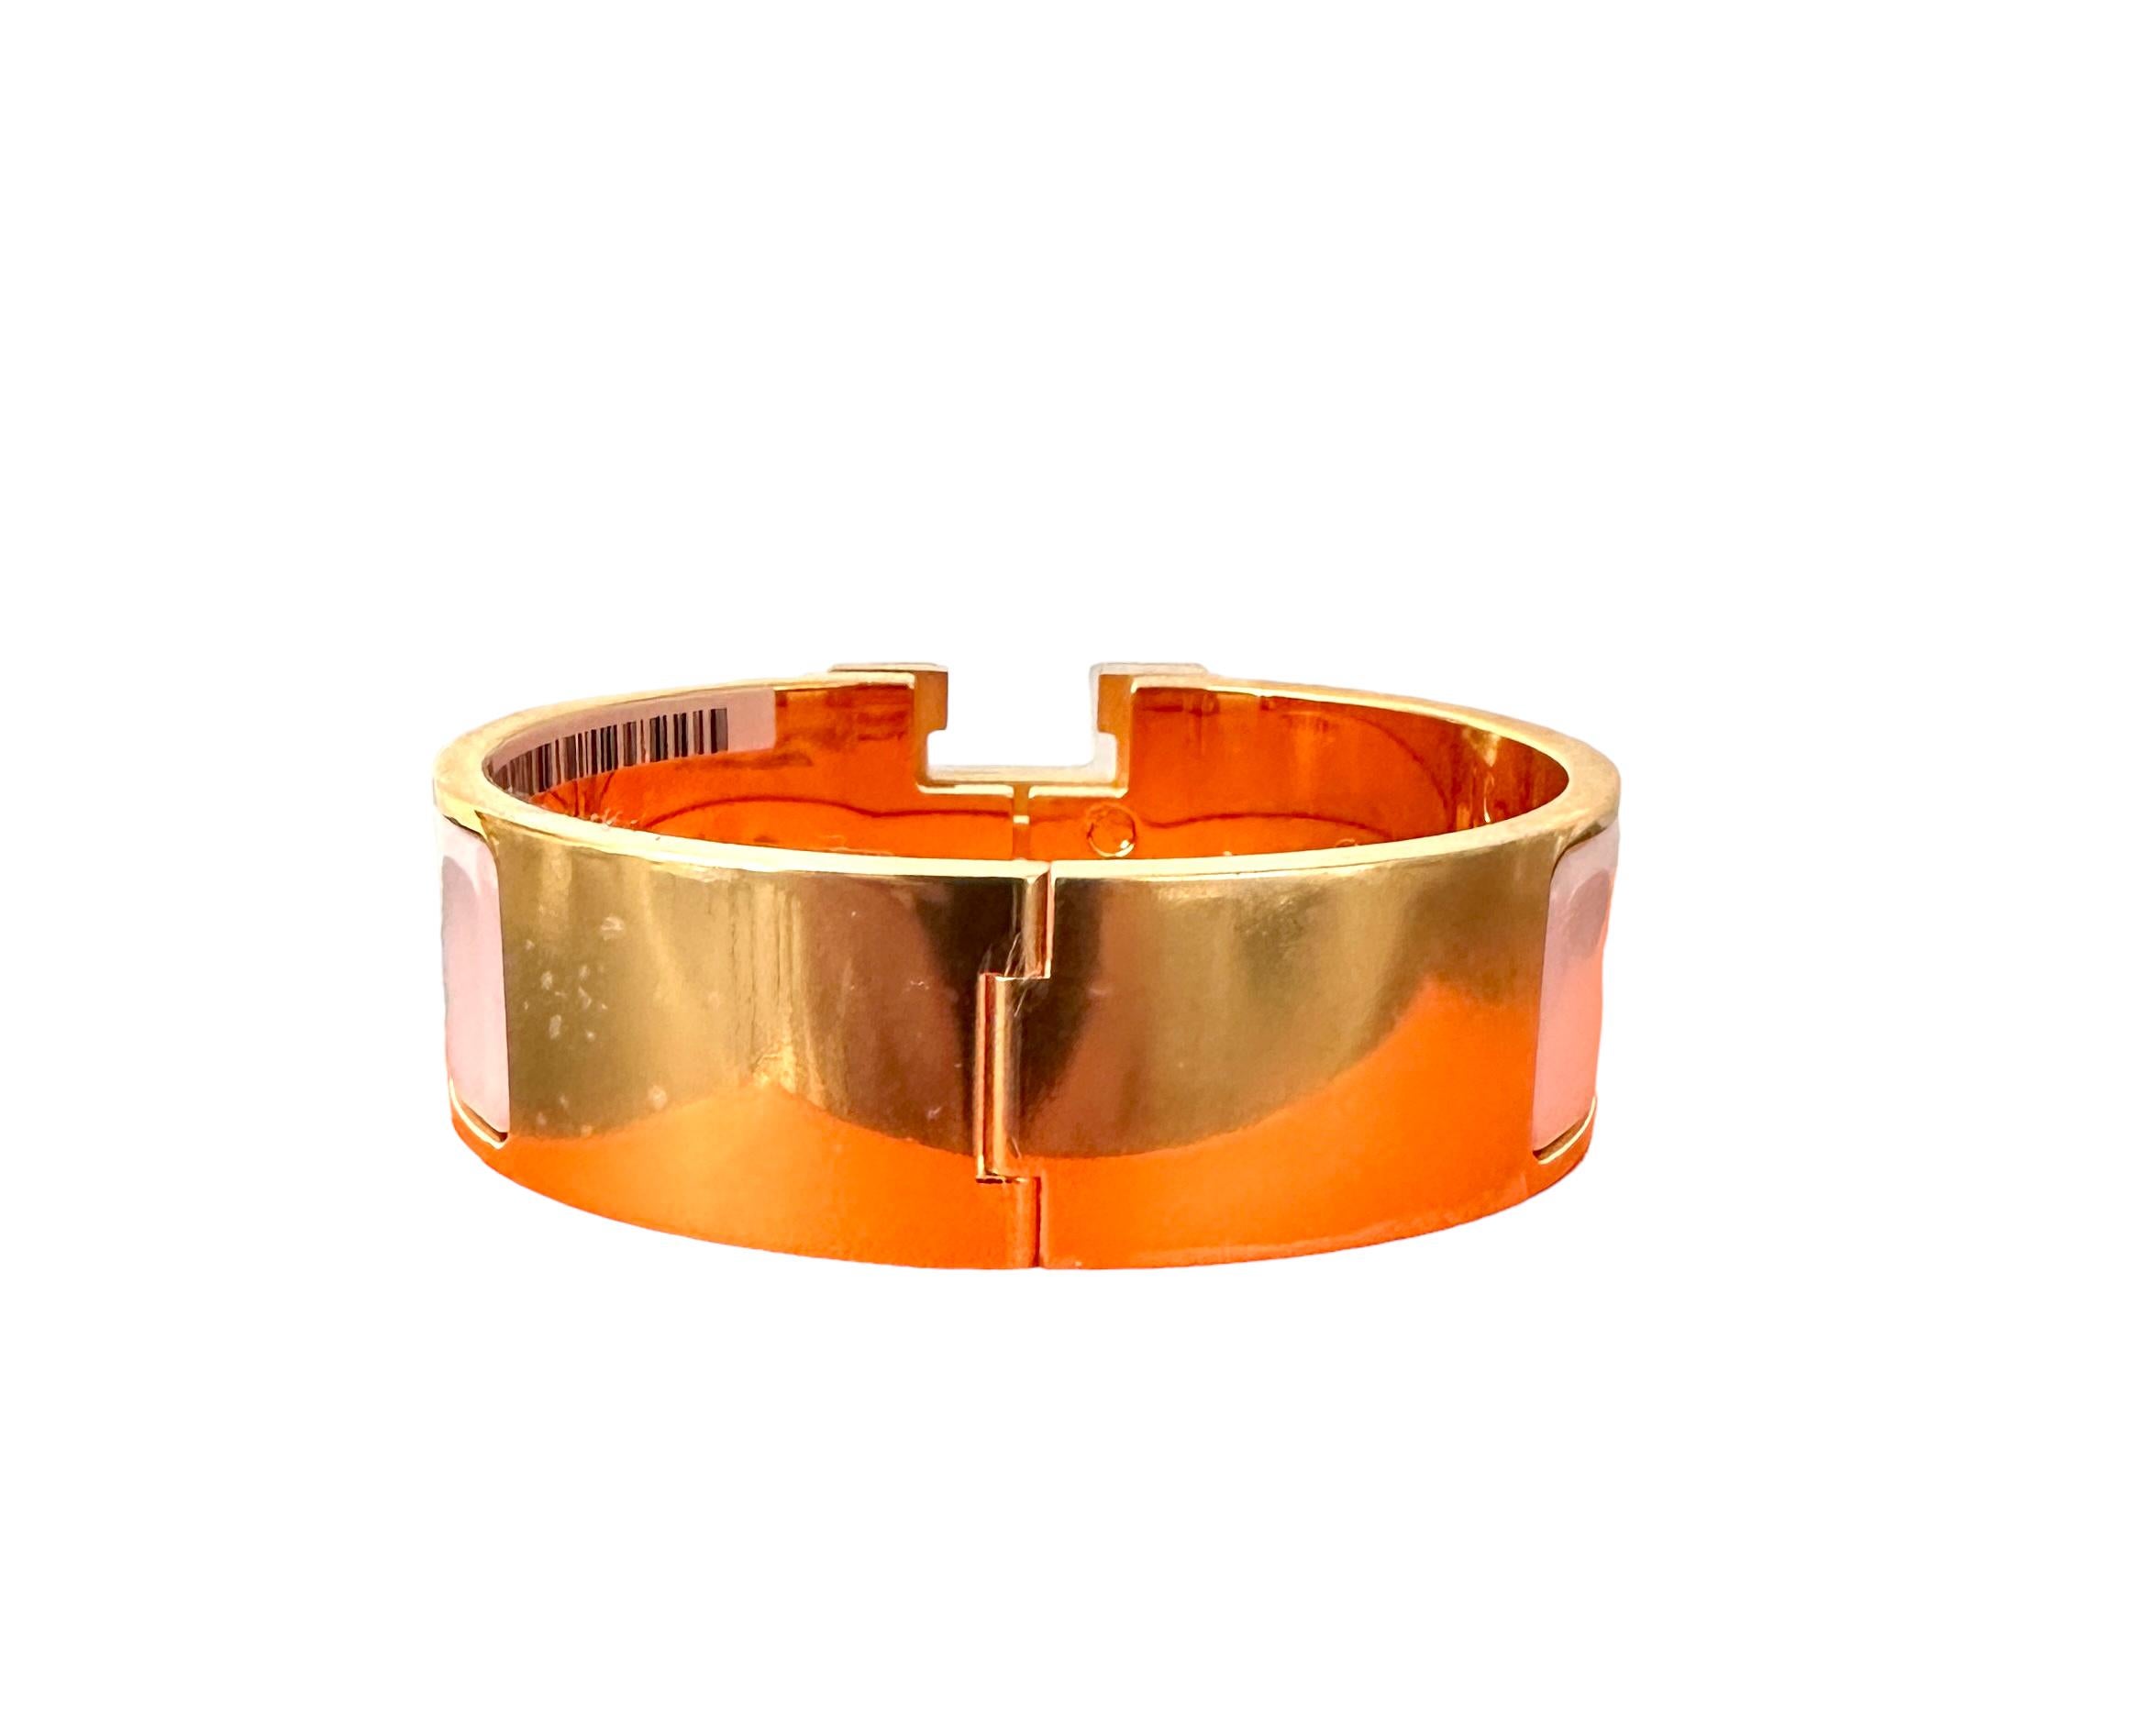 The Clic Clac H GM
GM SIZE IS THE LARGER SIZE
Hermes bracelet in Yellow Gold Plated 
Color is ROSE CANDEUR
Pink
GM size, for the larger hand 
Curently selling for $780 at Hermes 
Why pay full retail when we have it for less
The width of the enamel